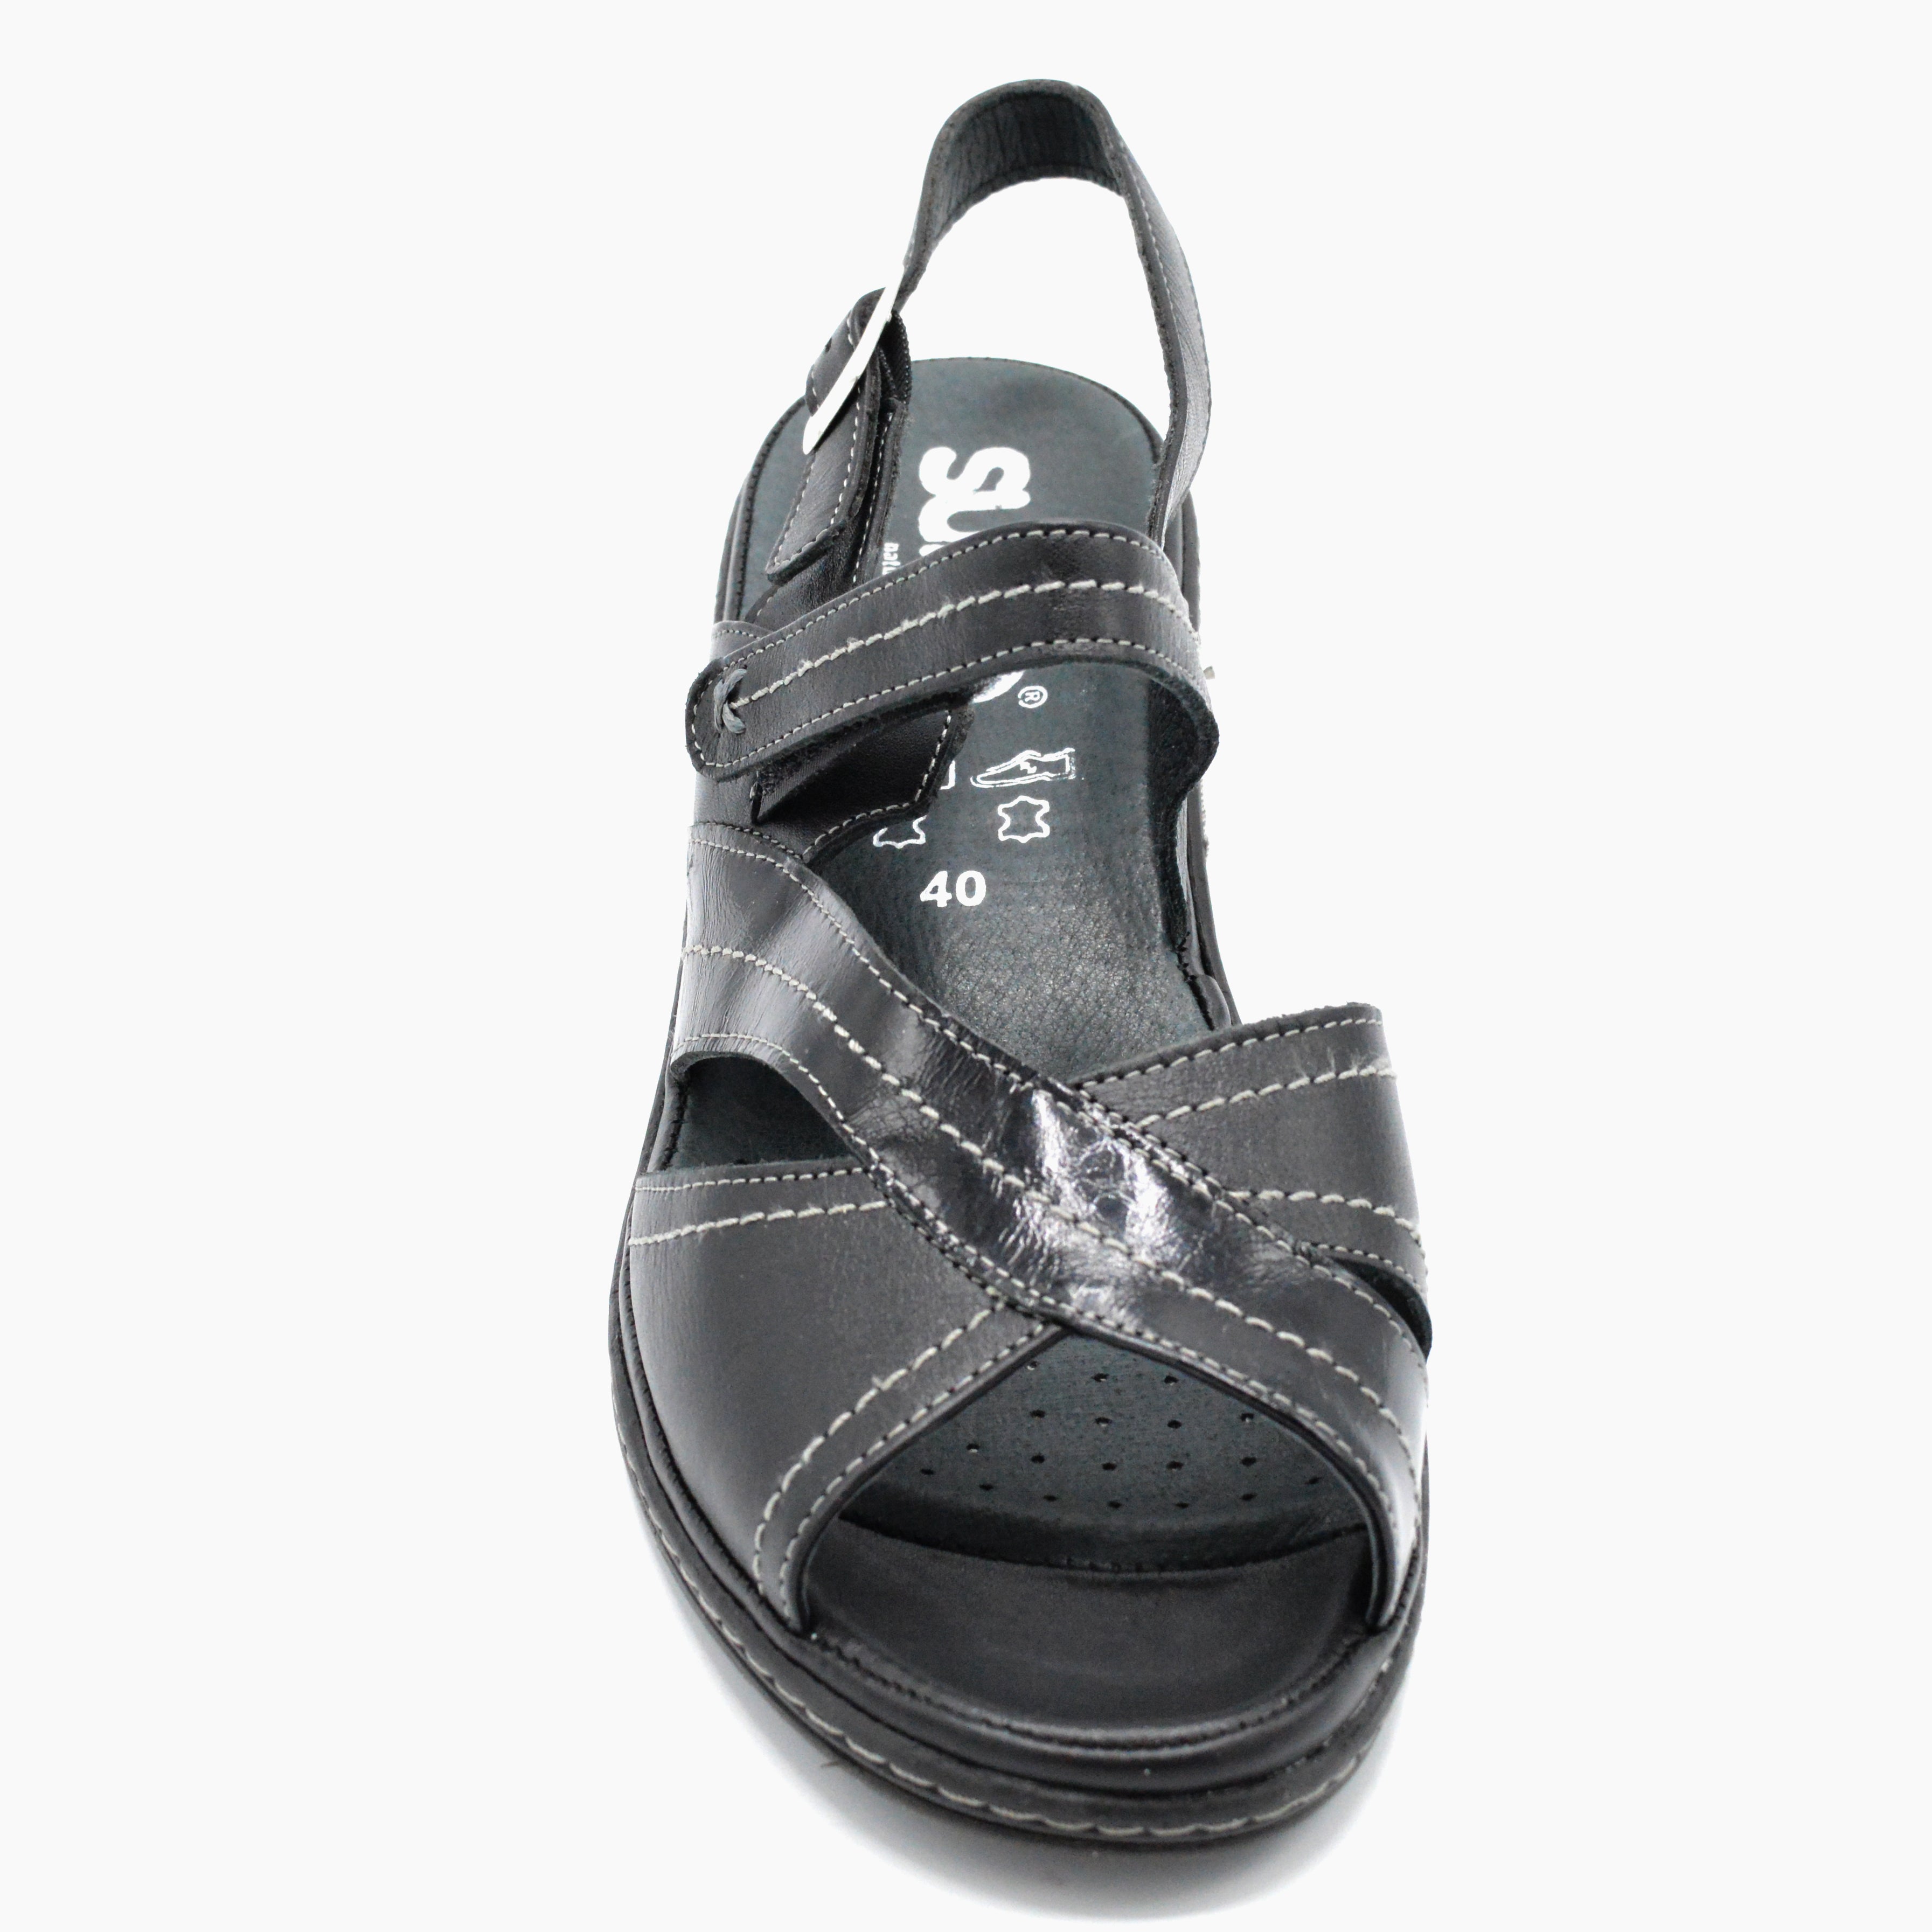 Eden by Suave - Wide Fit Evening Sandal in Black - 2E Fitting